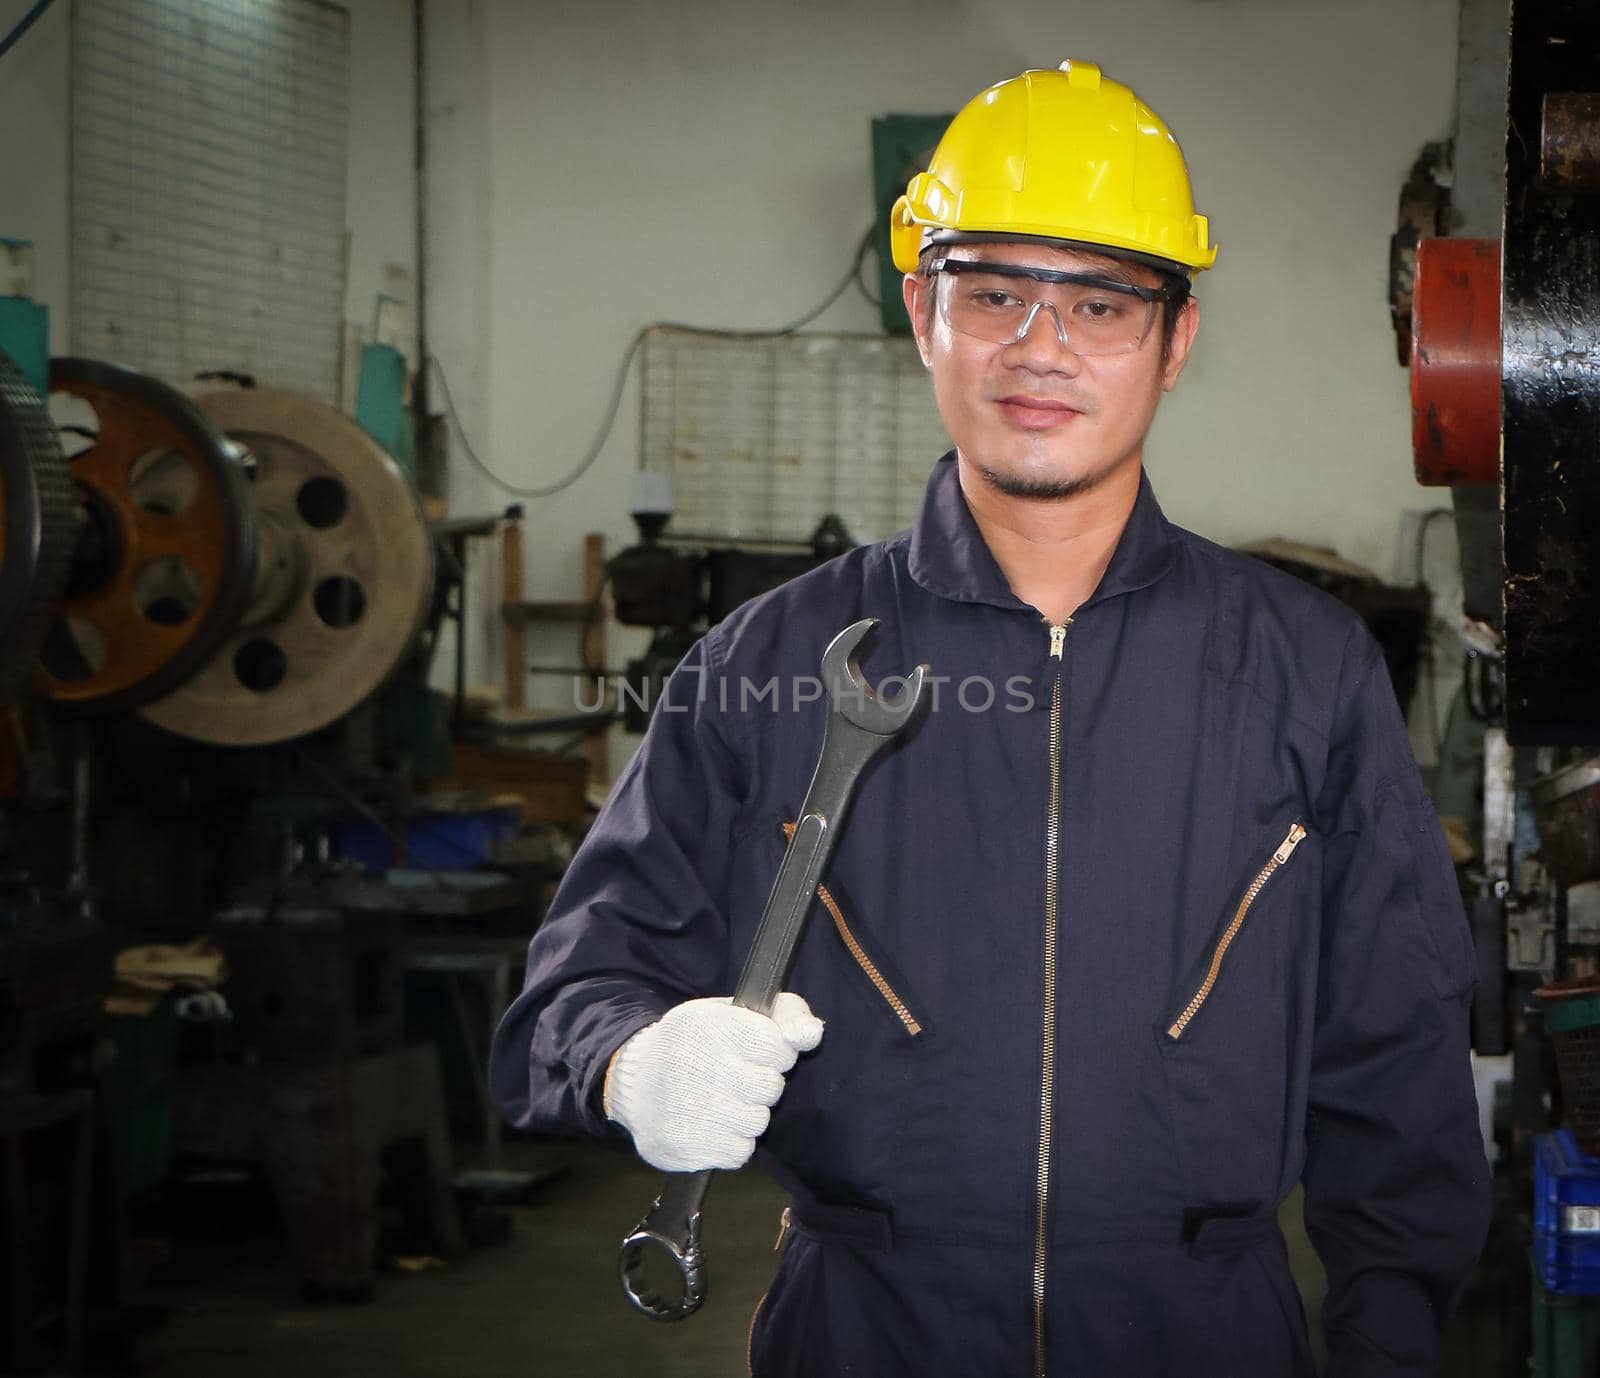 Asian male worker In industries that wear glasses, safety hats and safety uniforms Wrench tool holder stand by atitaph